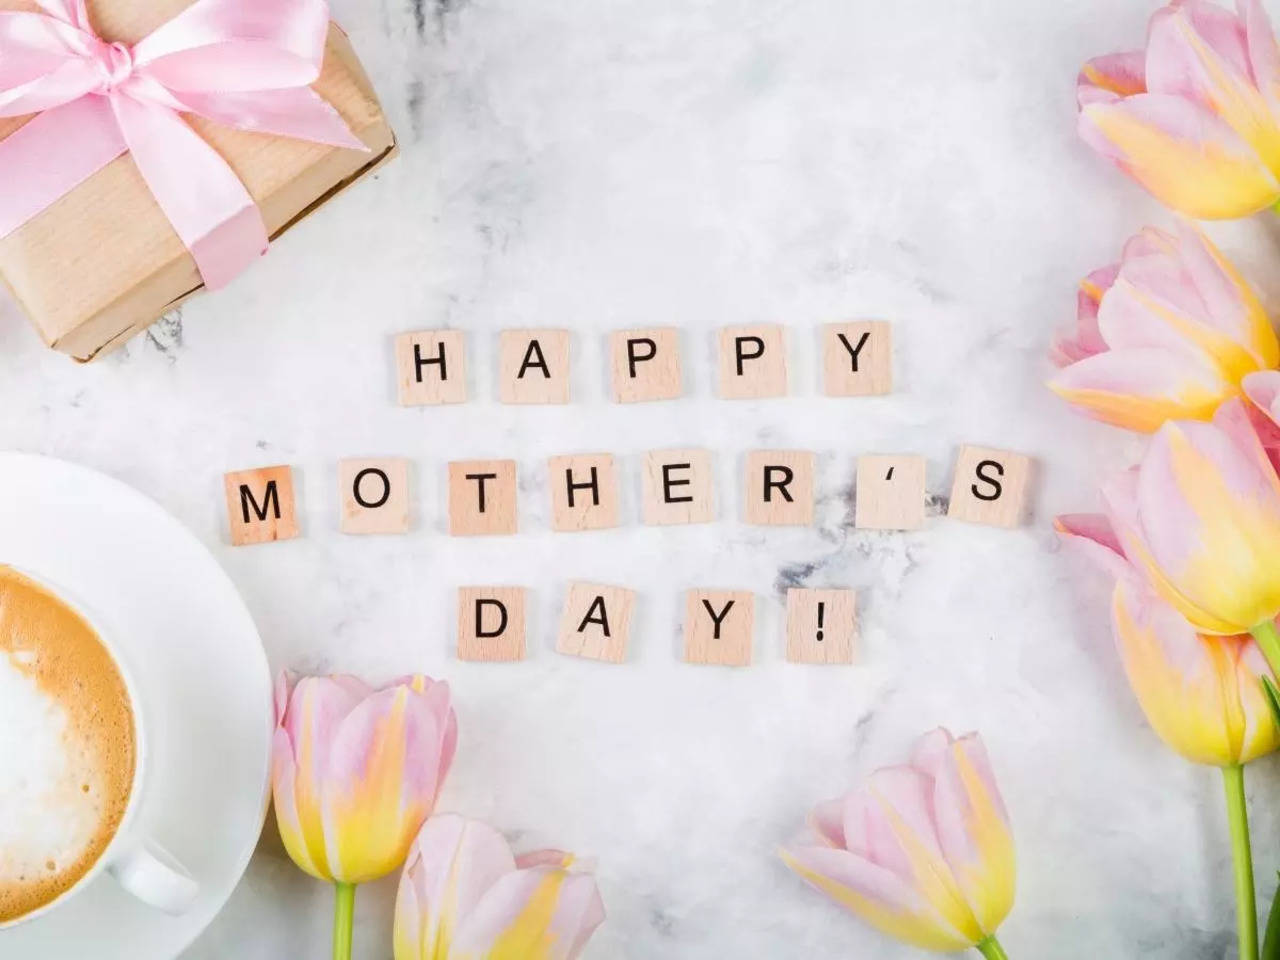 Mother's Day Quotes: 15 meaningful quotes by famous authors to ...